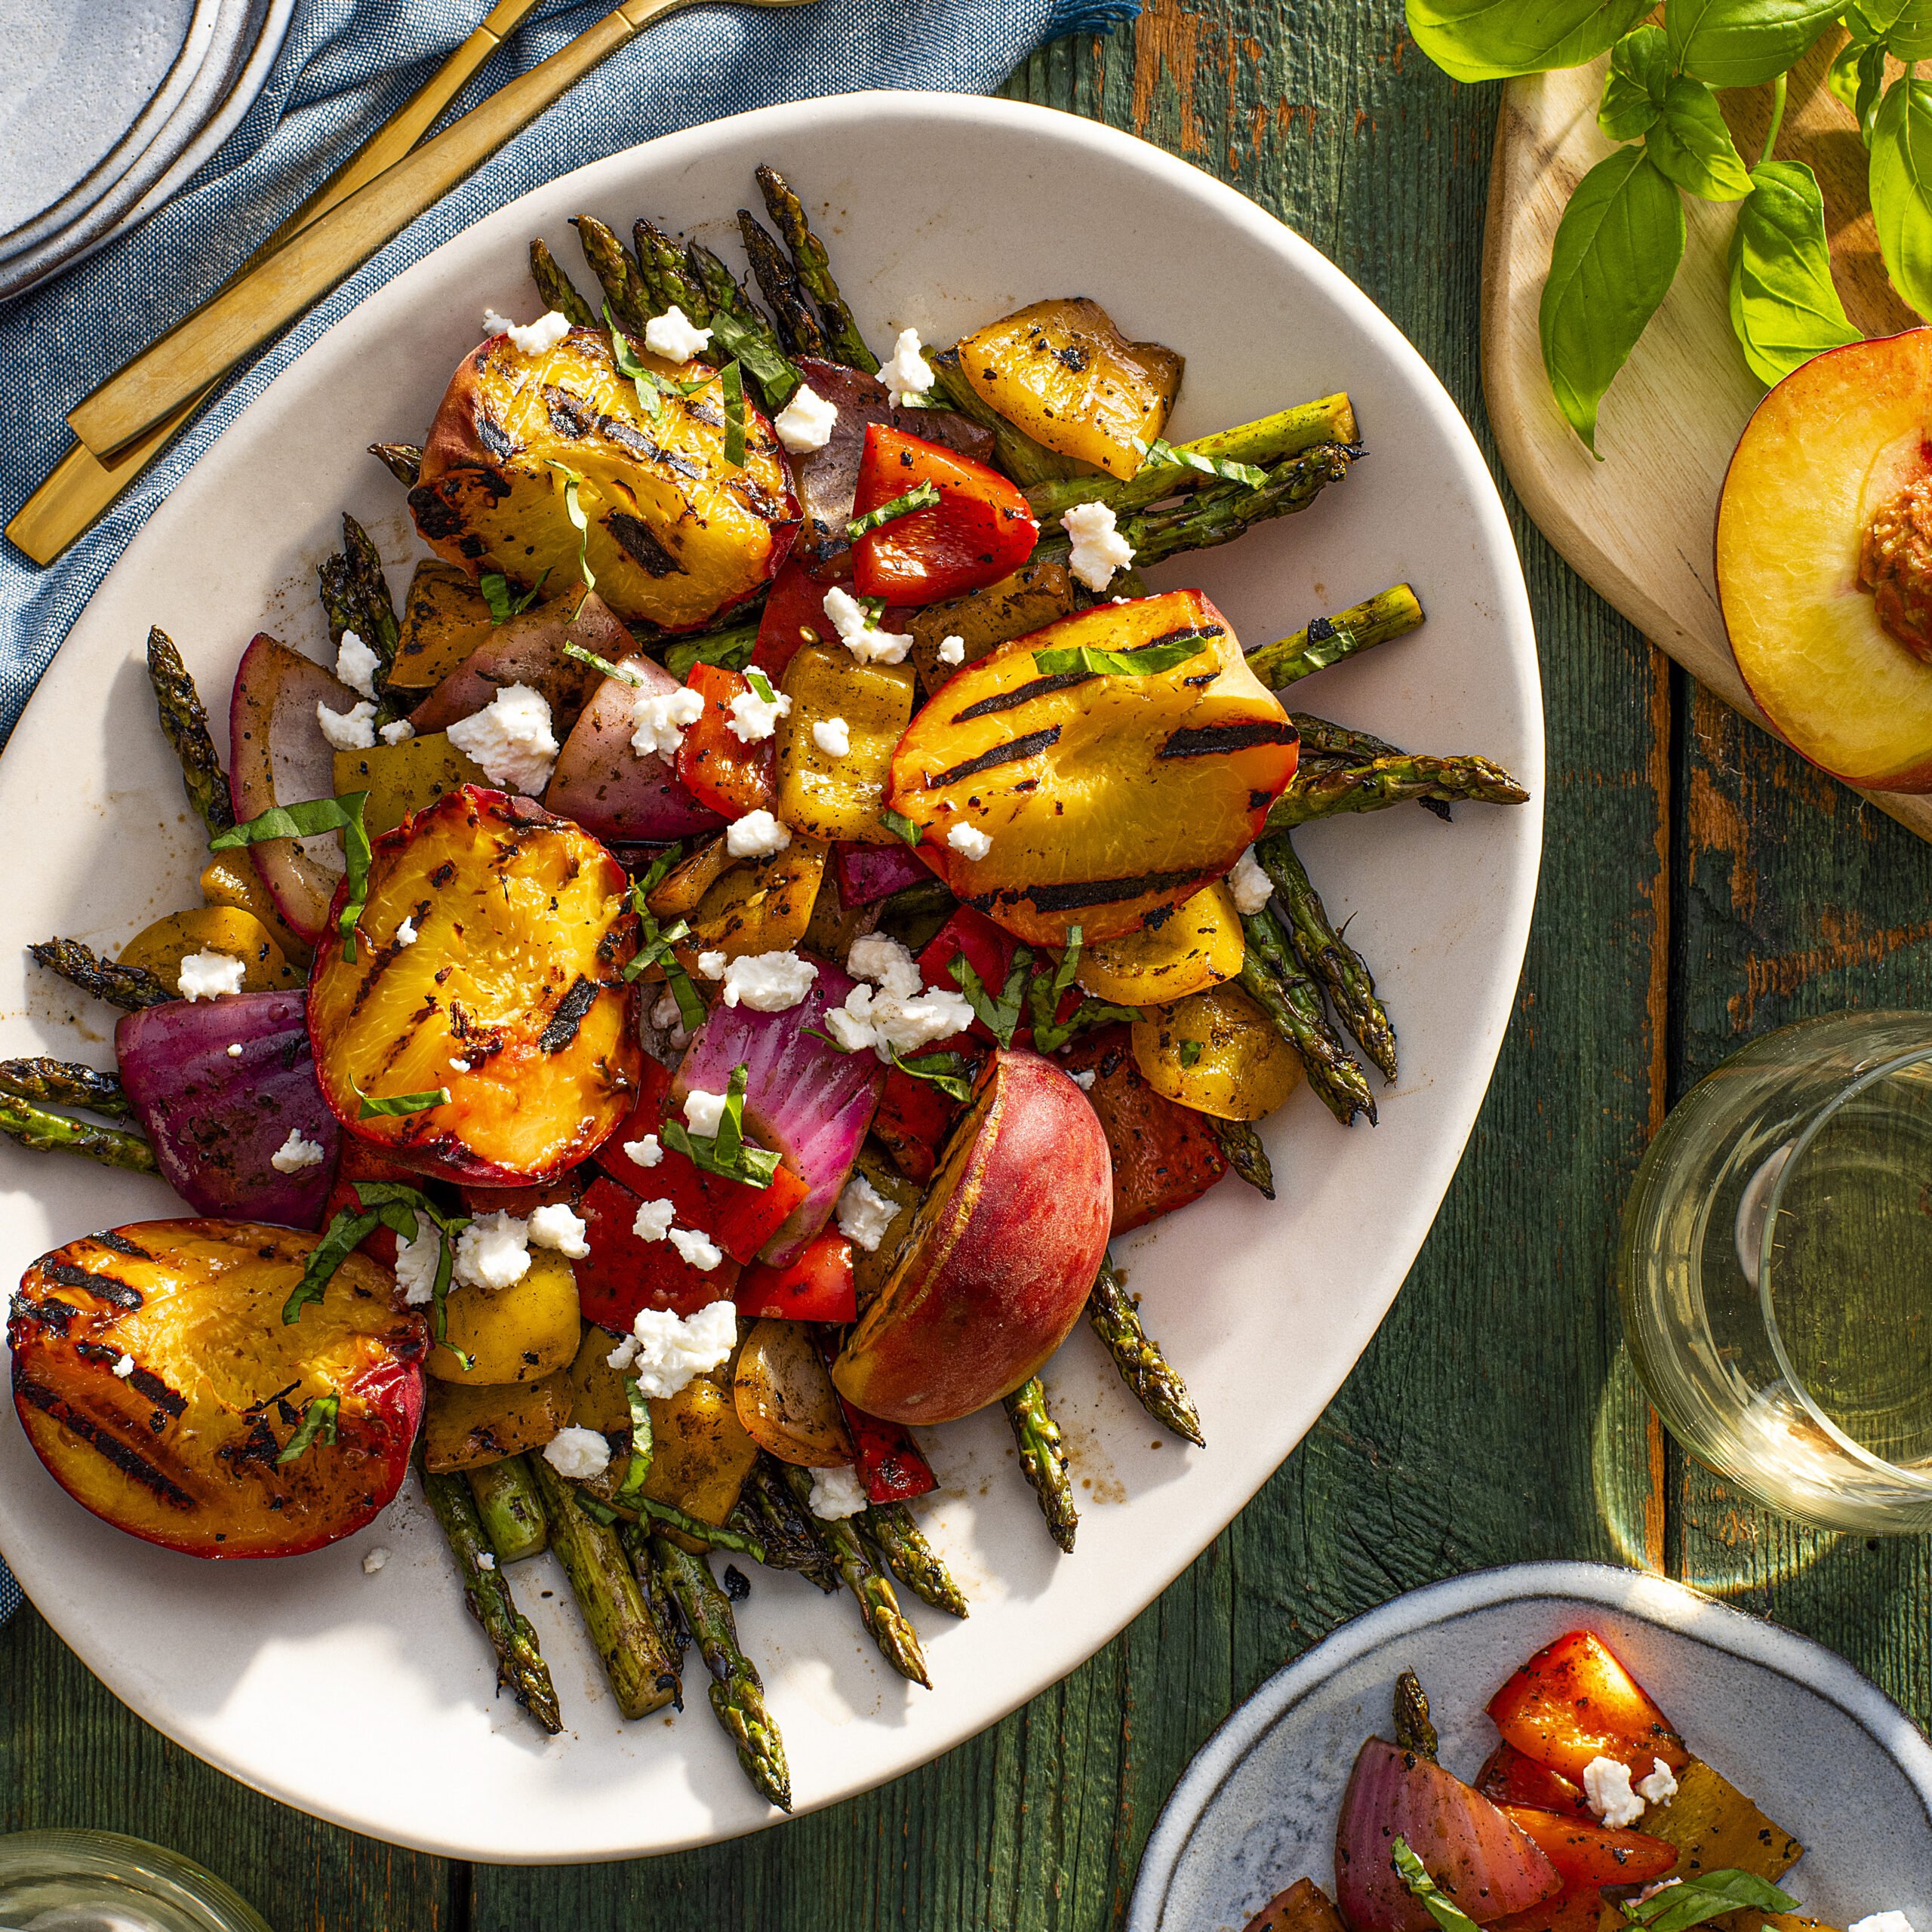 Grilled Peach and Asparagus Salad with Goats Cheese